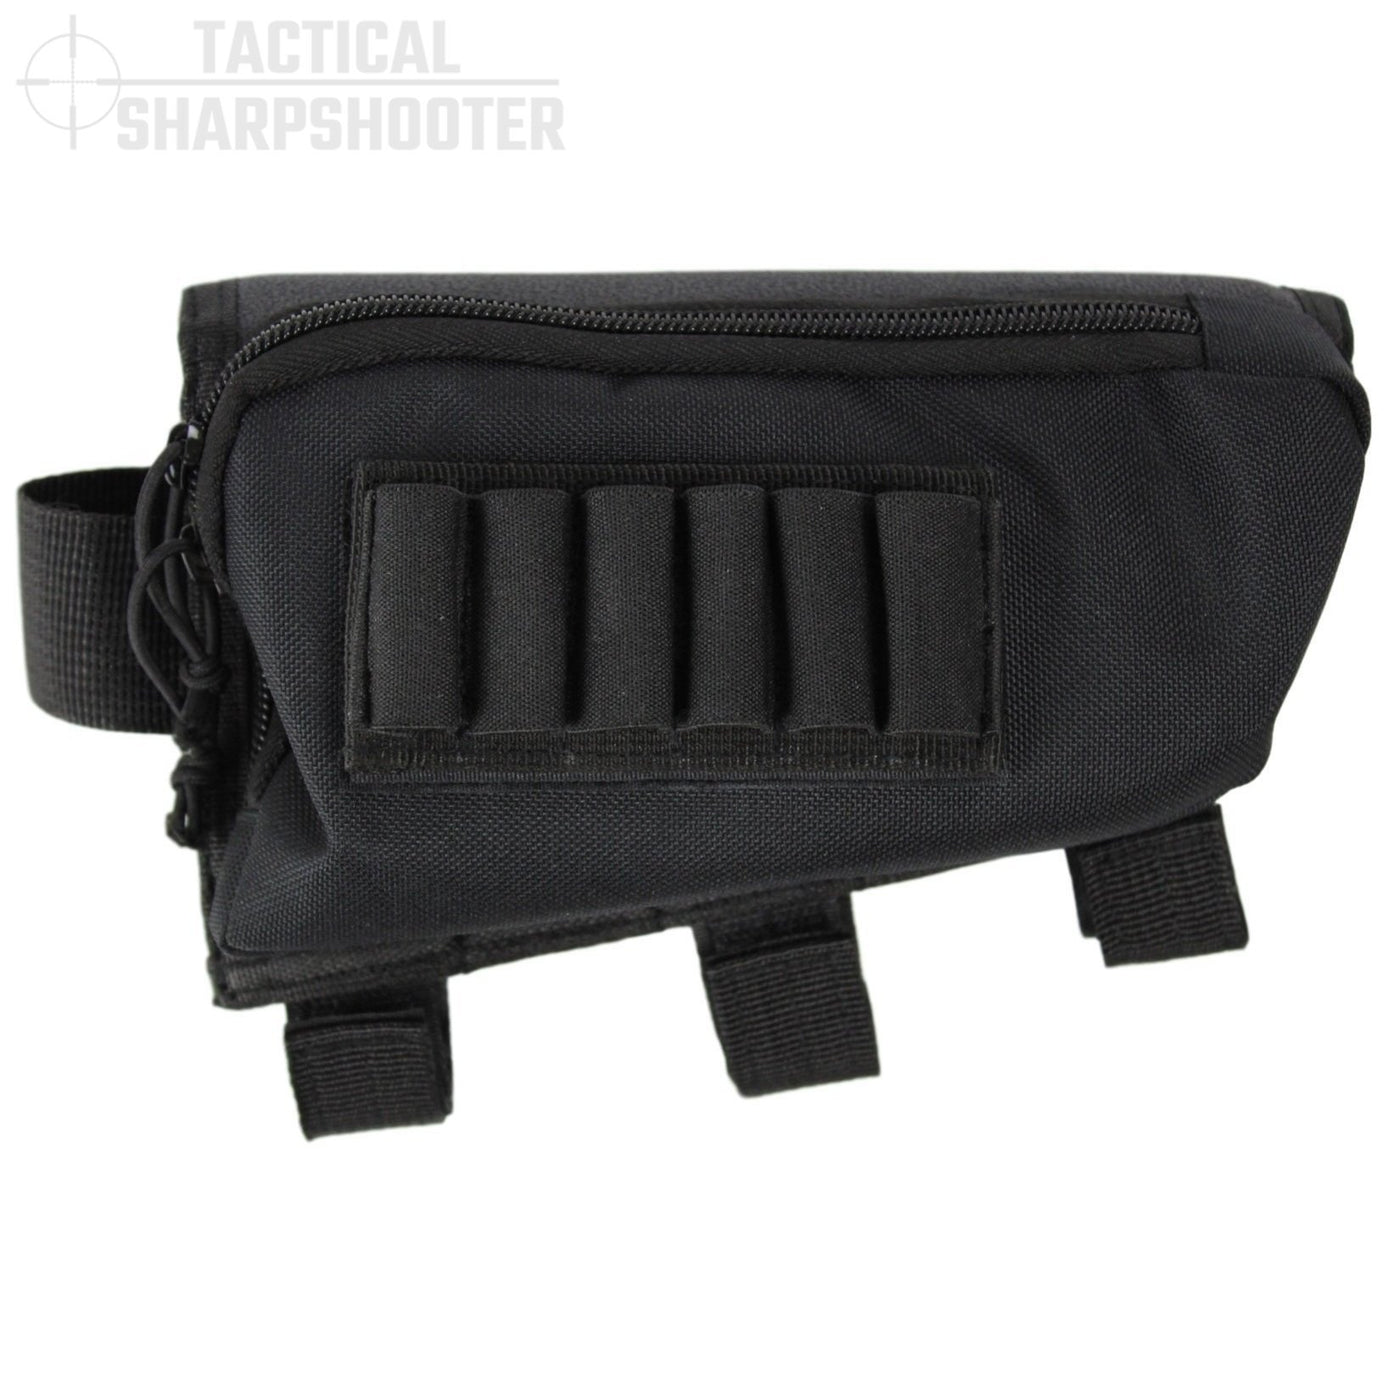 Sharp Shooter Tactical Style - Richards Microfit Stocks